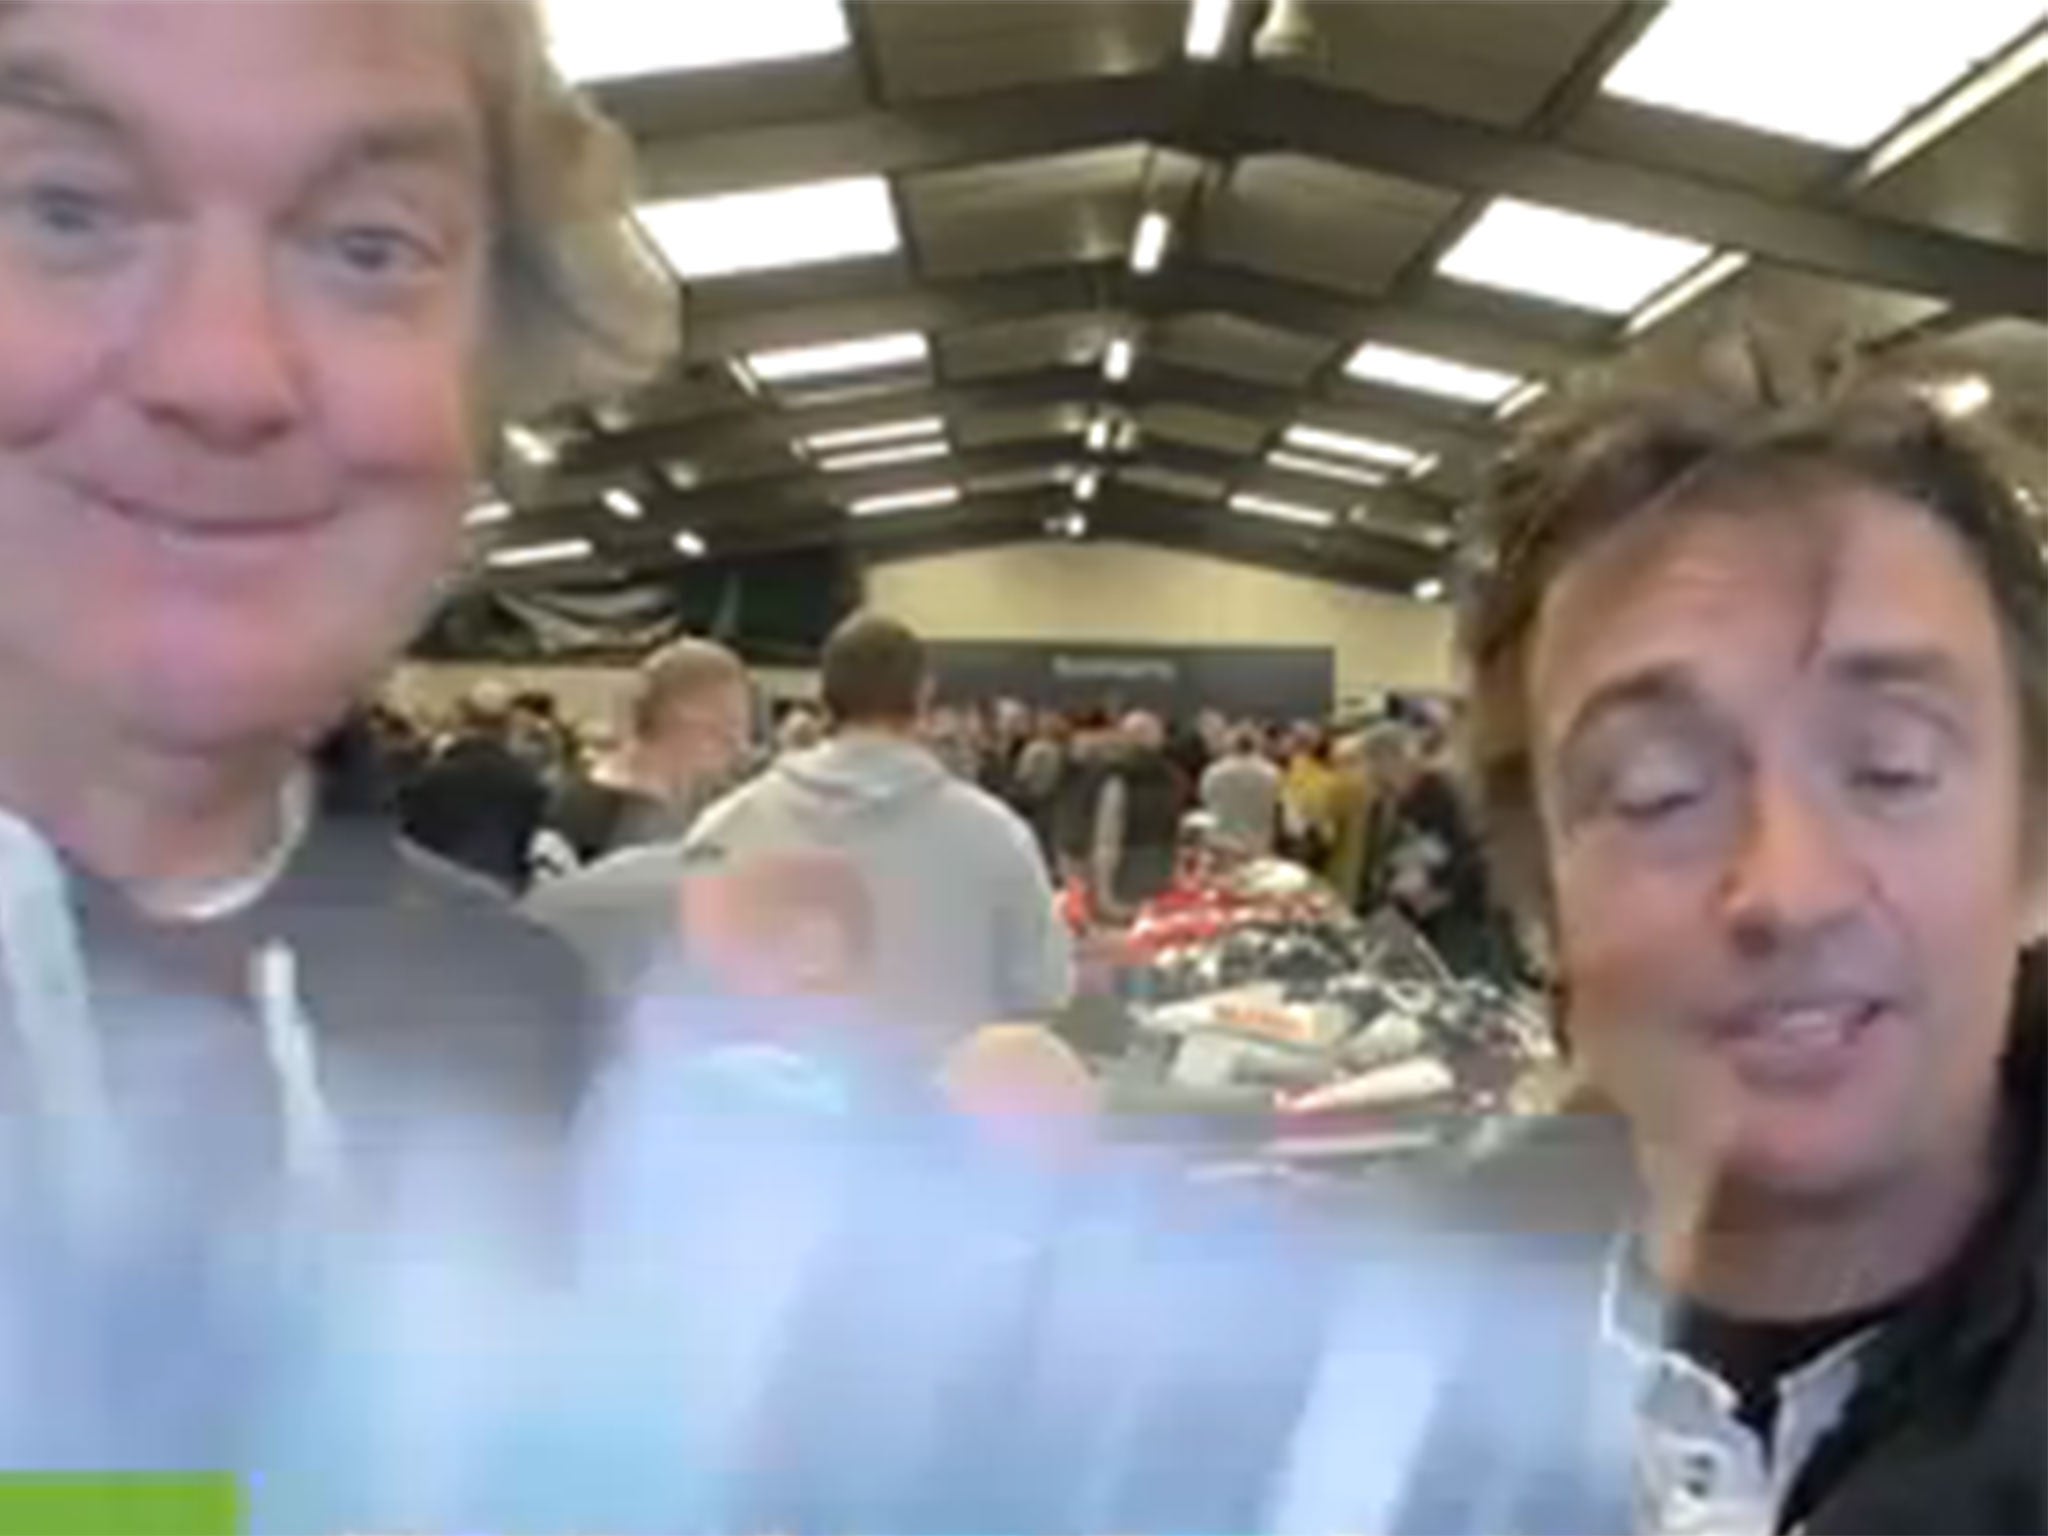 Hammond and May ridiculed the journalist for asking about their futures at the Motorbike show